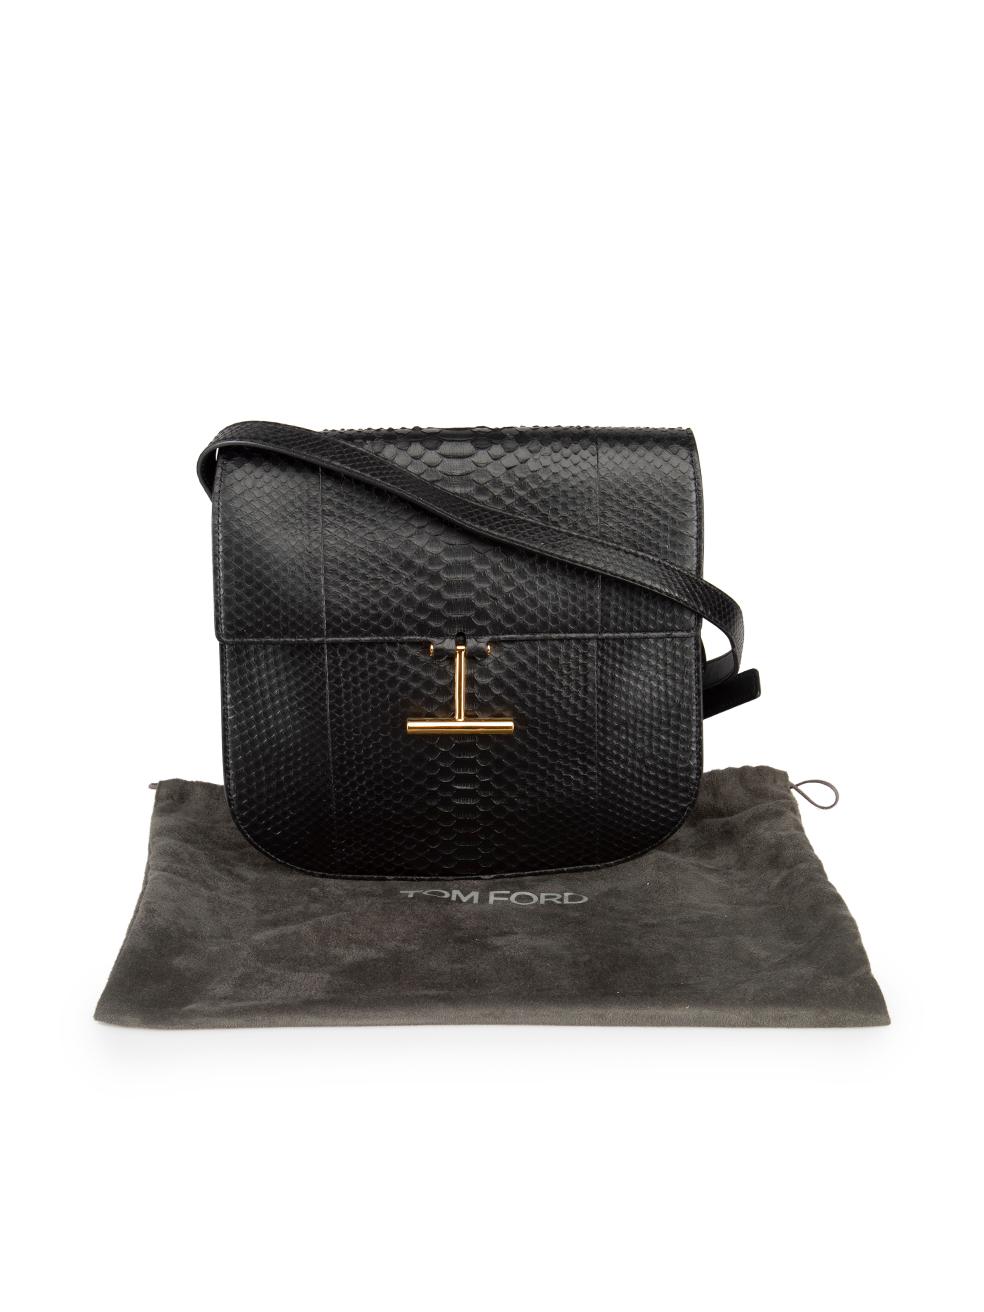 Tom Ford Black T-Plaque Python Leather Crossbody For Sale 2